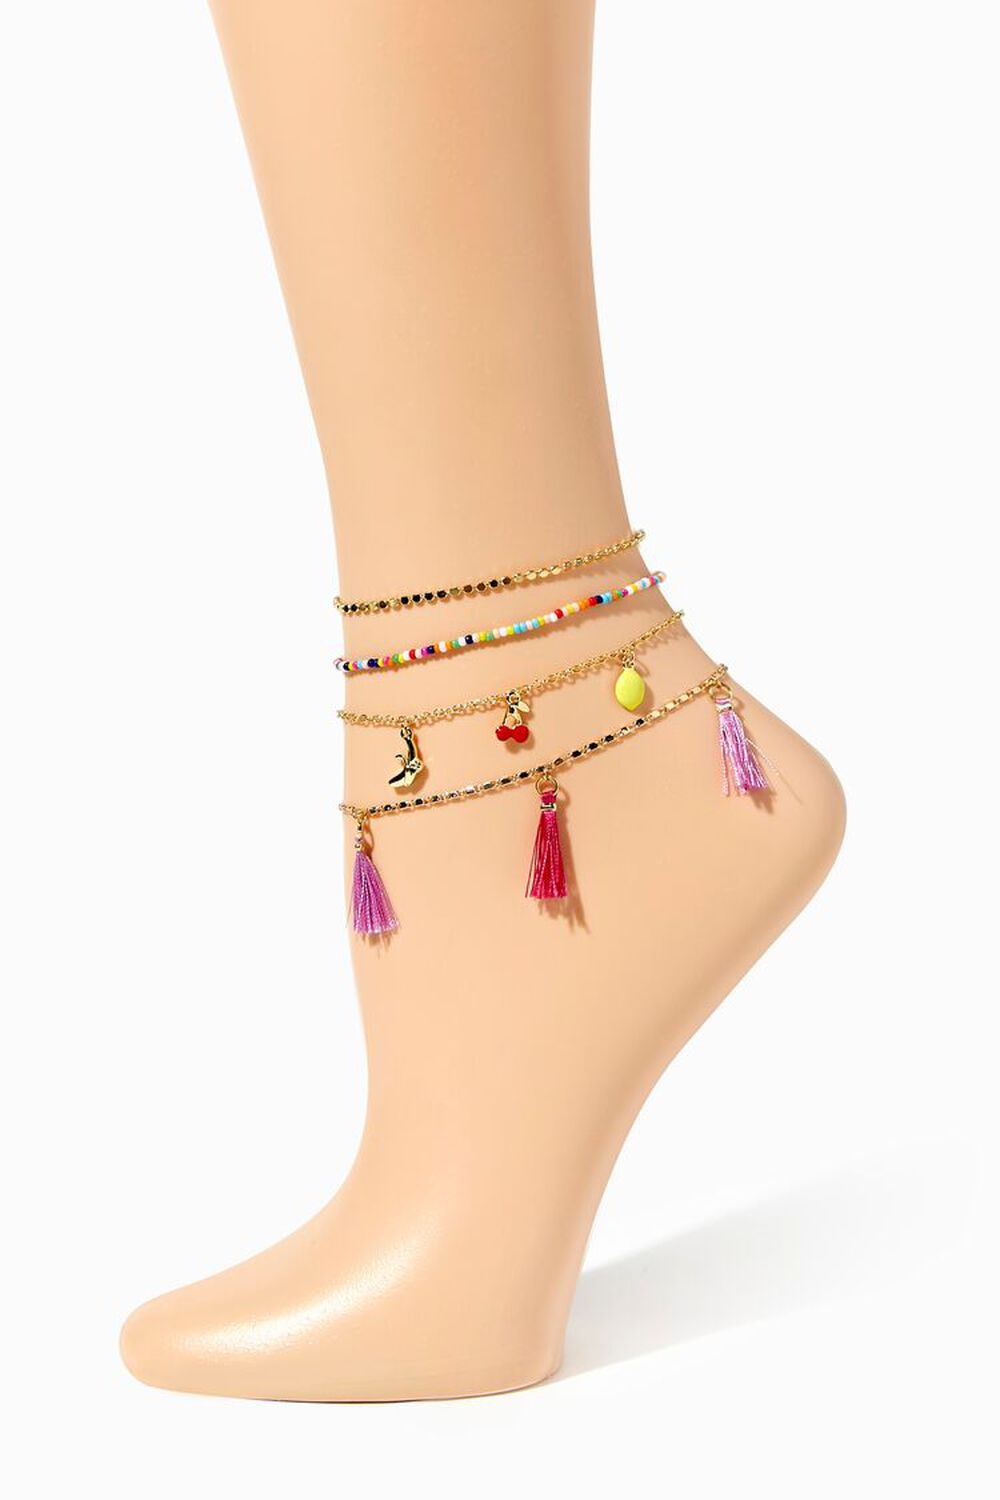 Cherry Charm Chain Anklet Set, image 2